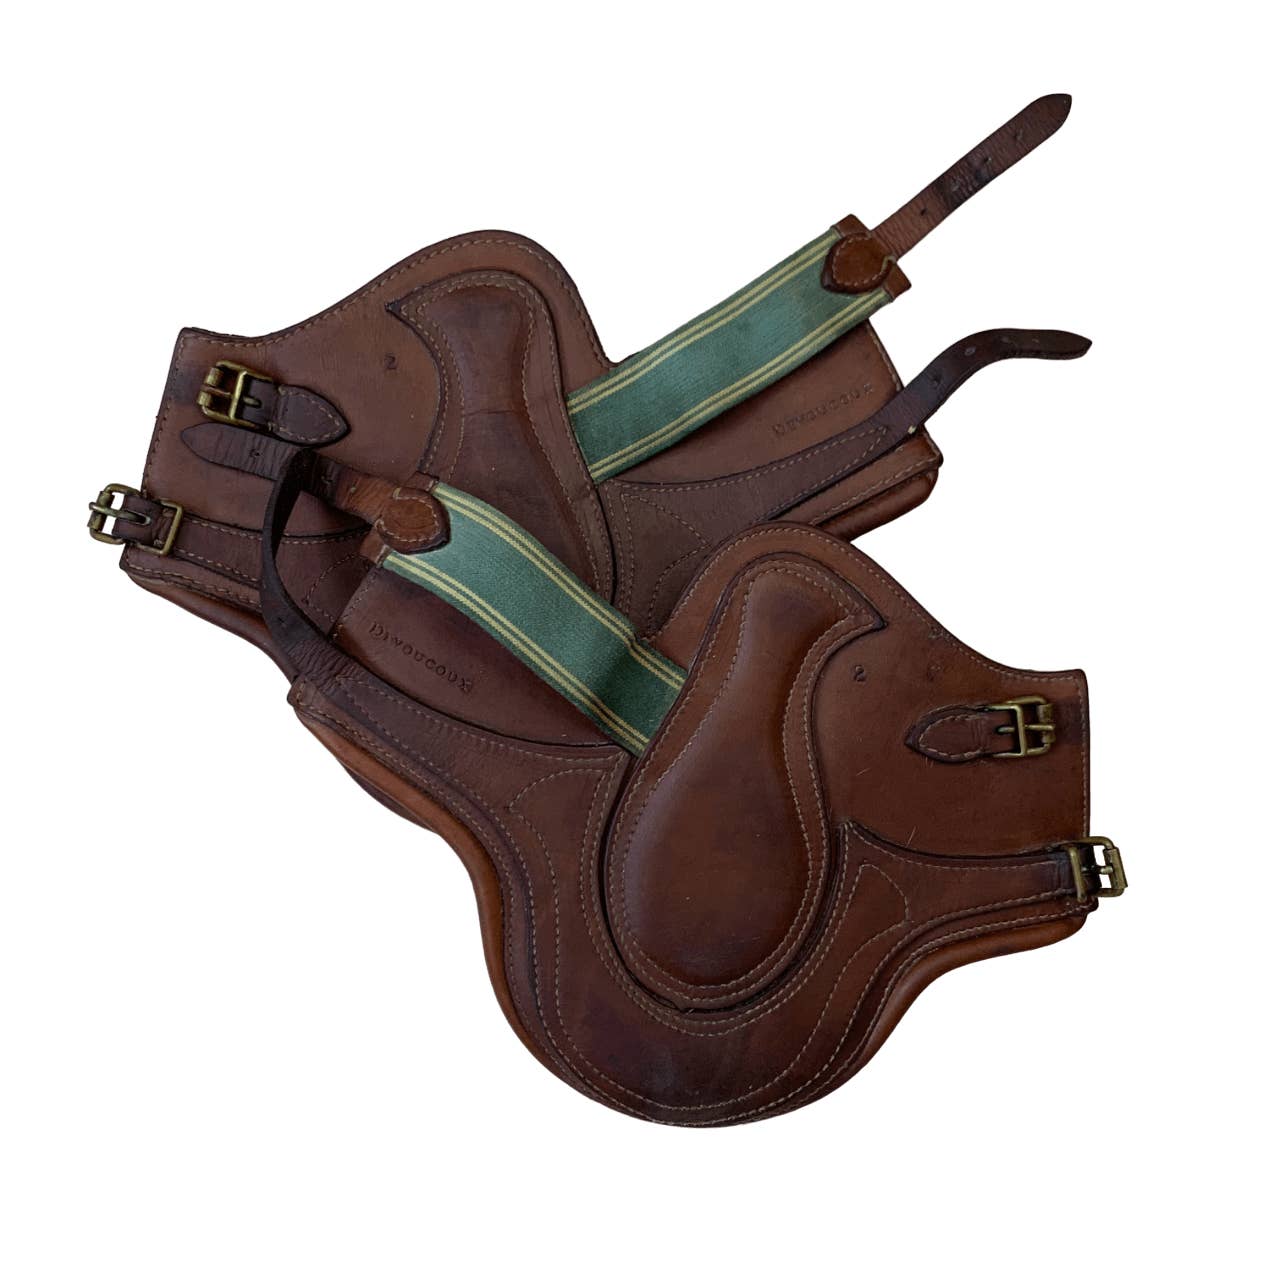 Devoucoux 'Chiberta' Cross-Country Open Front Leather Fetlock Boots in Brown - 2